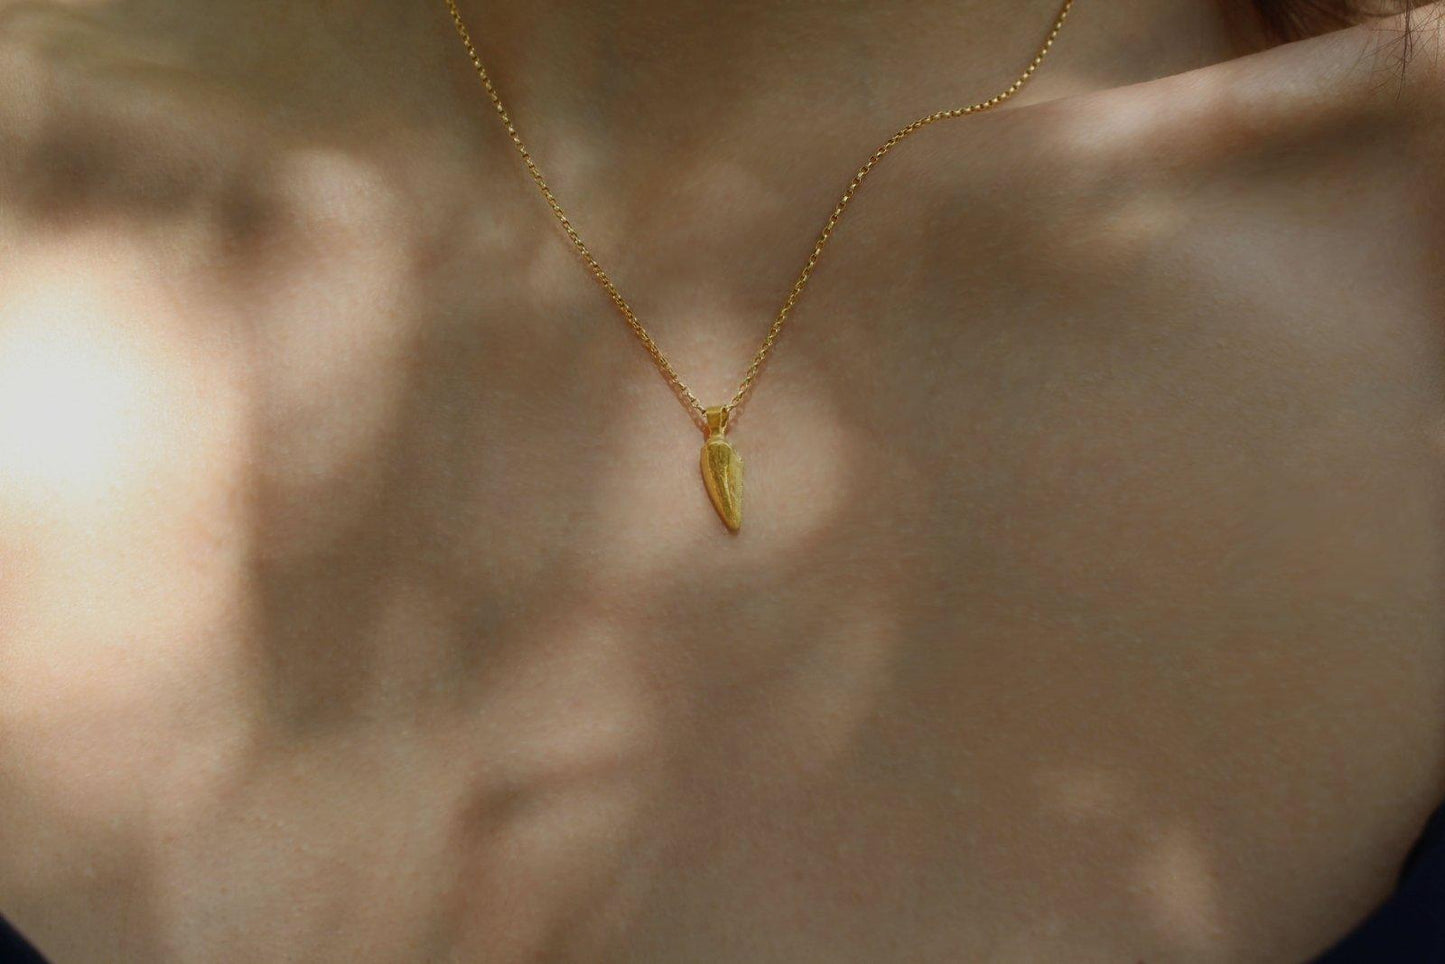 Raptor Tooth Necklace - 9ct Gold - Brotheridge